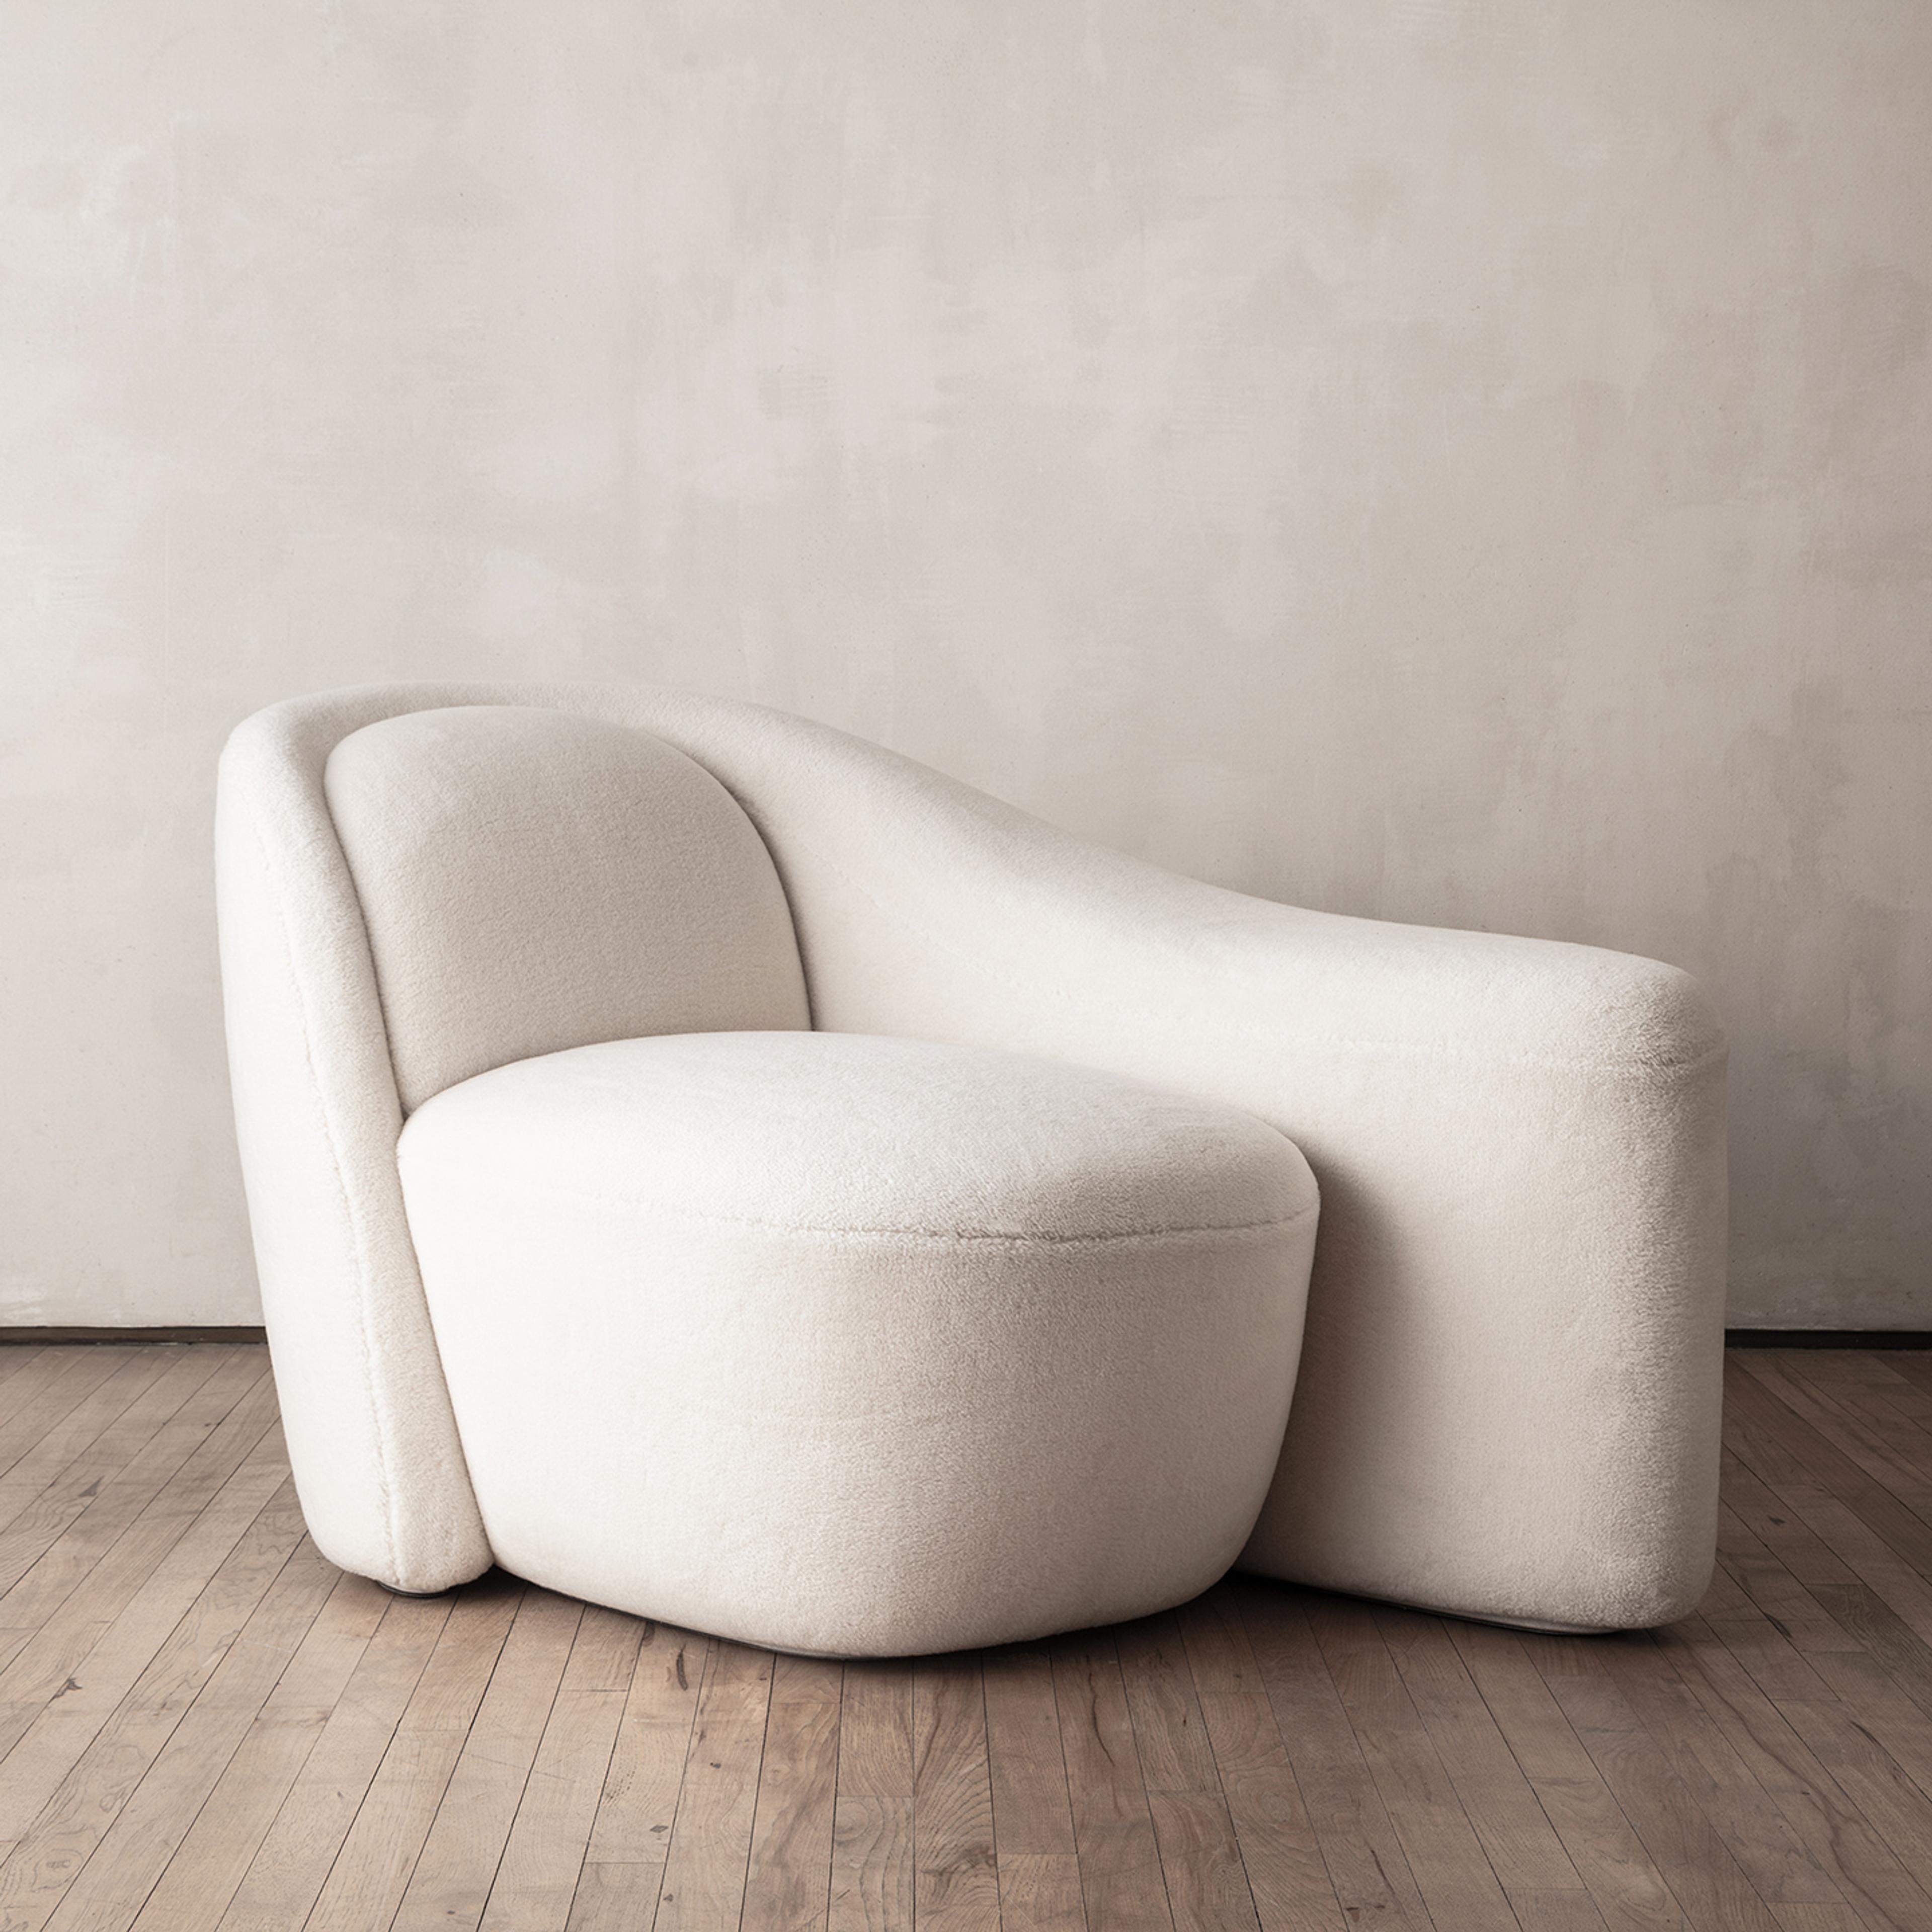 Loro Piana Chaise by Raphael Navot for Ateliers Courbet